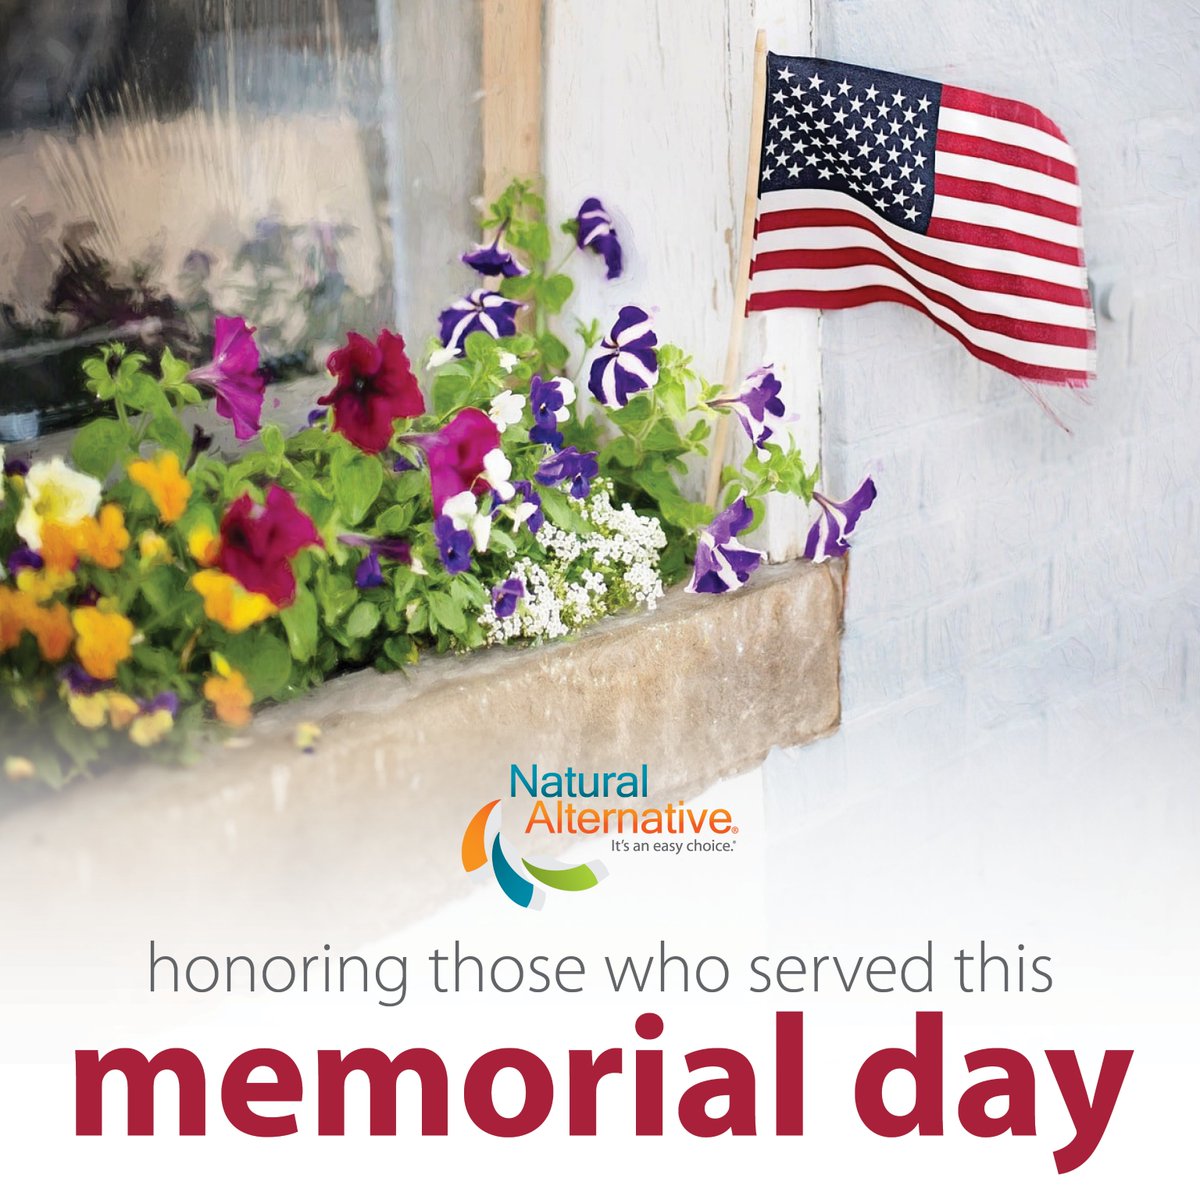 Thank you to the brave heros of our country who have made the ultimate sacrifice. We salute our fallen and give thanks on this Memorial Day.

#NaturalAltBrand #NaturalAlternative #DIY #MemorialDay